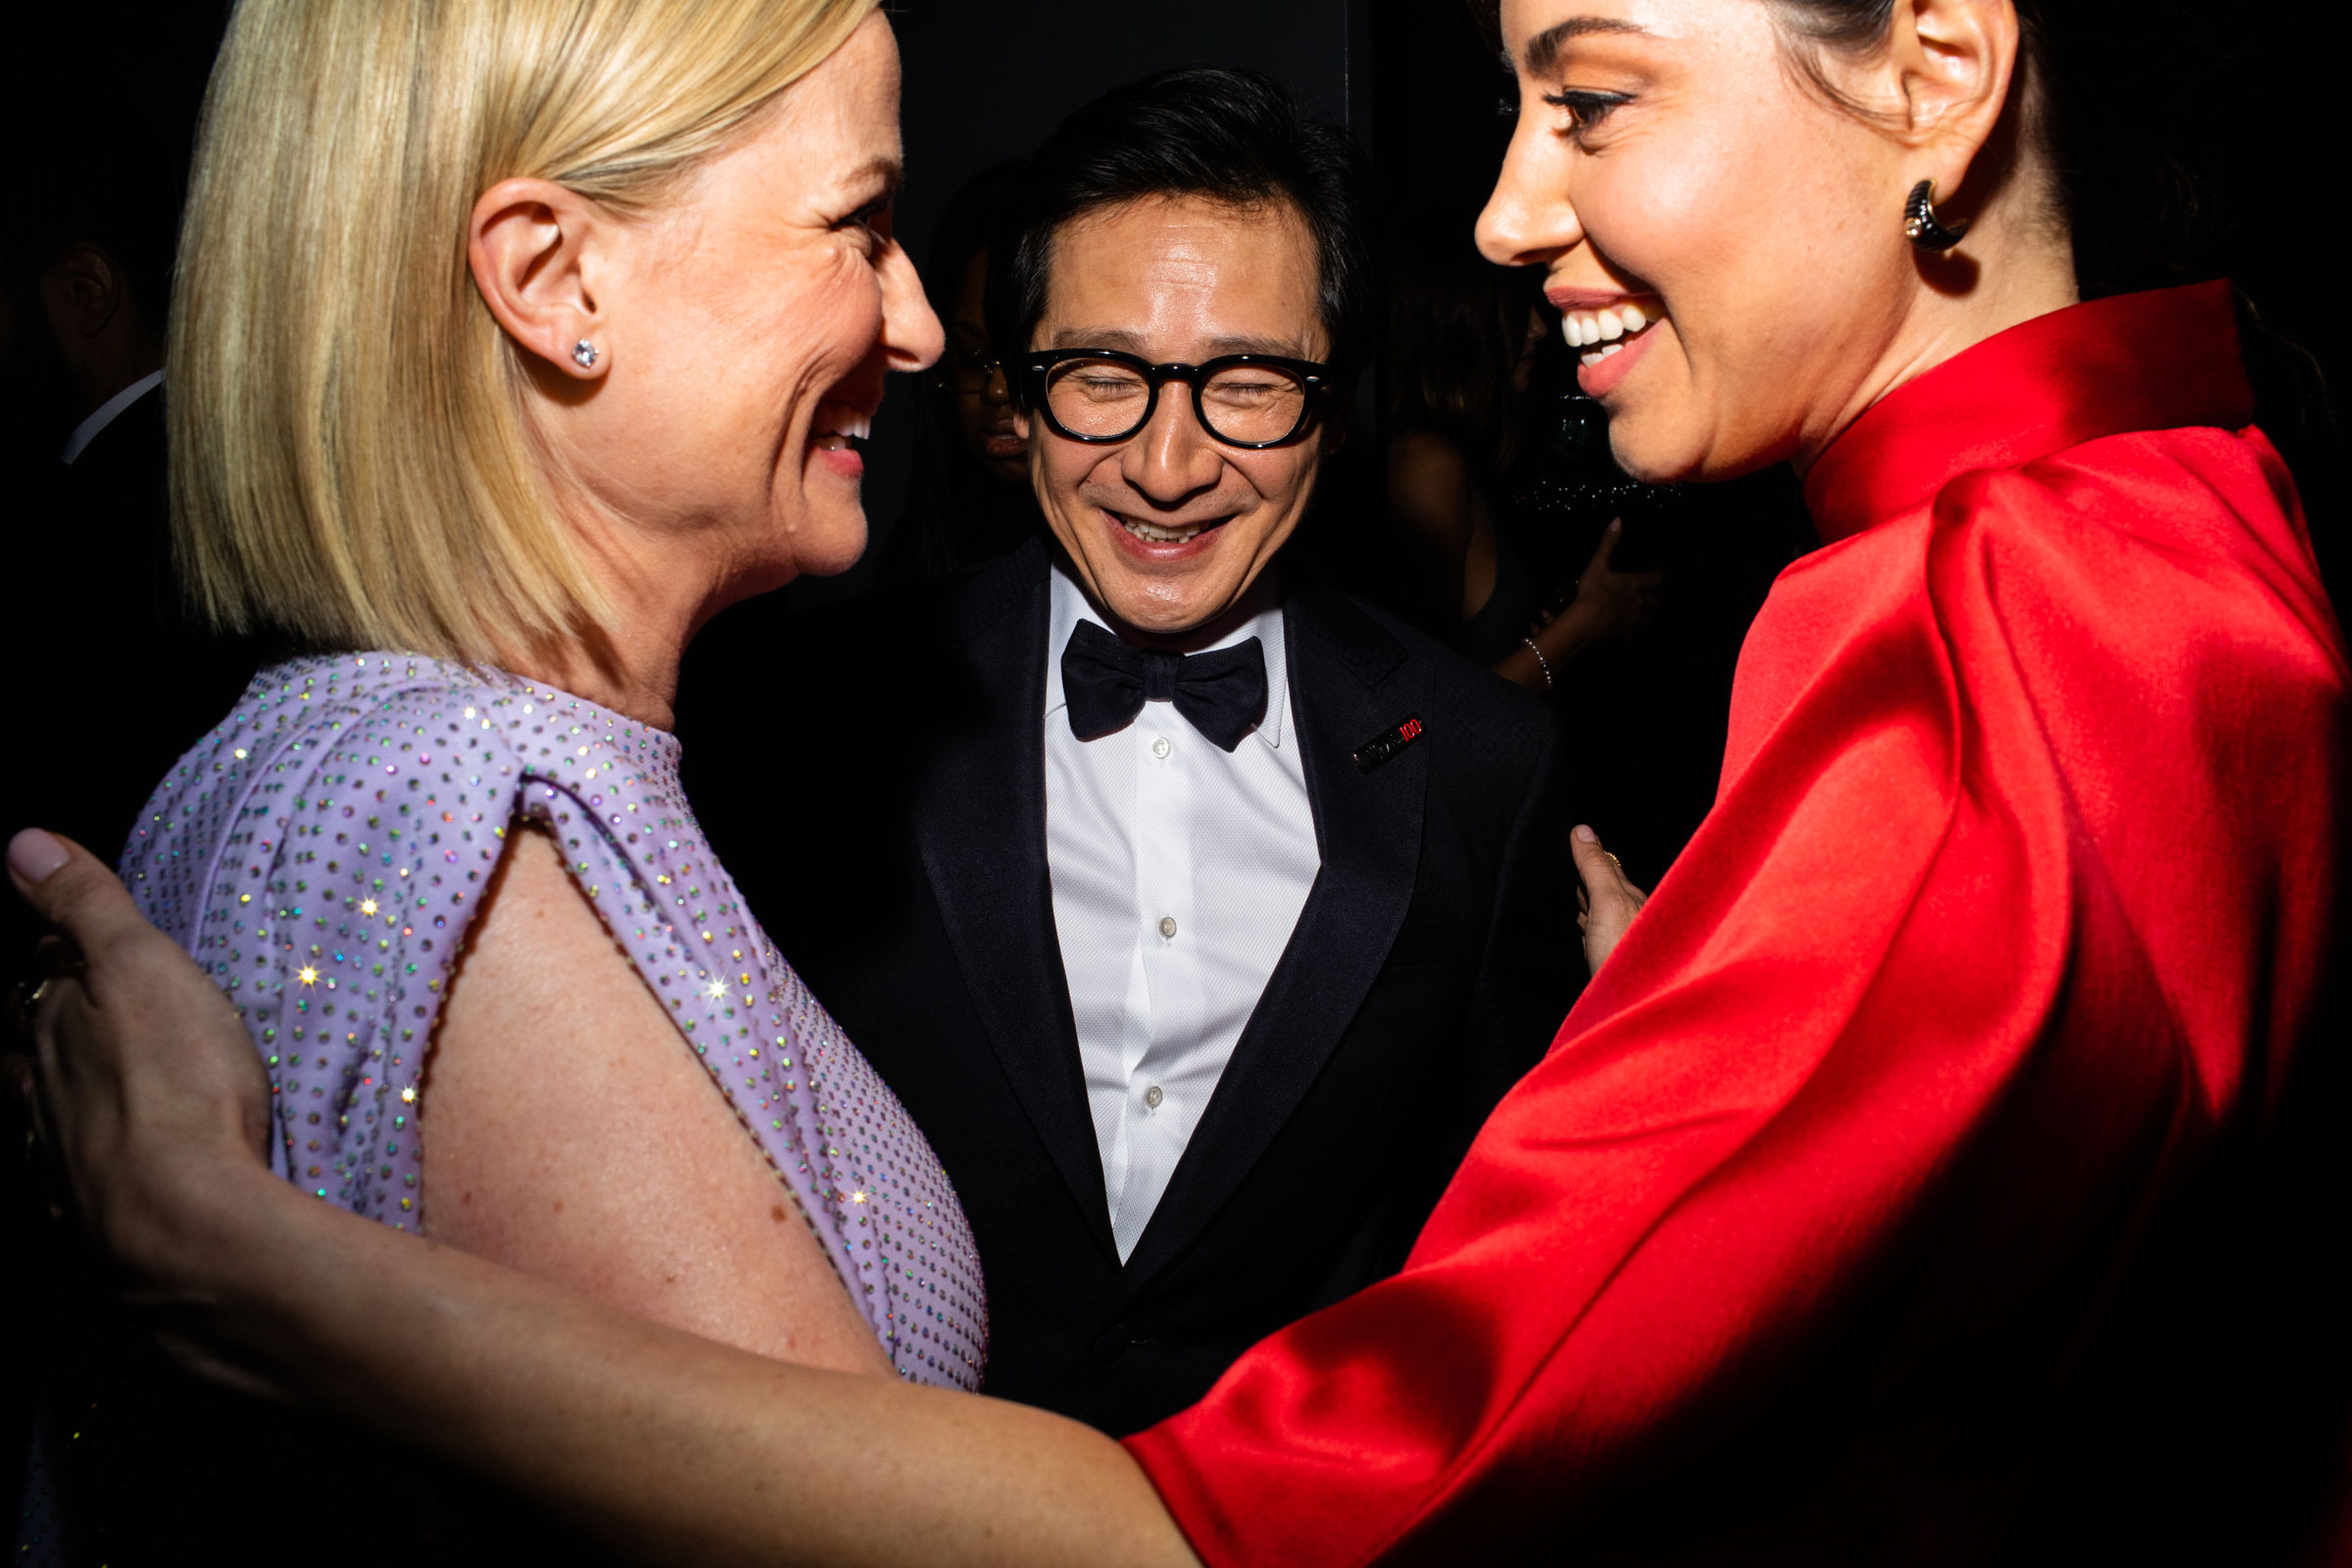 Amy Poehler, Ke Huy Quan, and Aubrey Plaza attend the TIME 100 Gala at Jazz at Lincoln Center in New York City, on April 26, 2023. (Landon Nordeman for TIME)